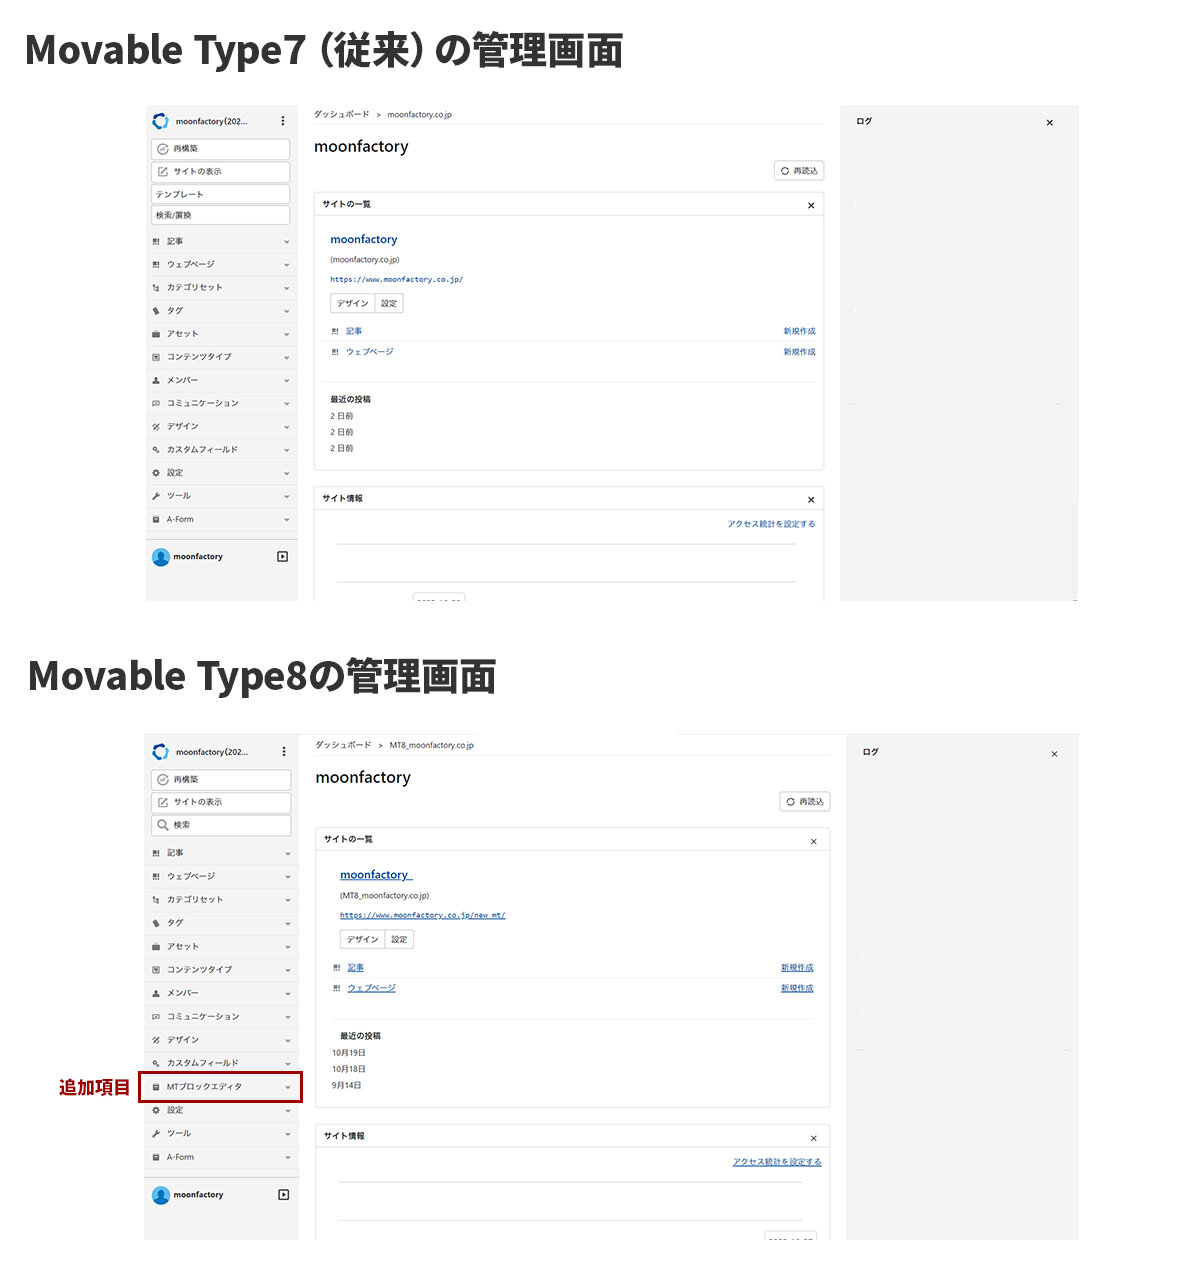 Movable Type7とMovable Type8 管理画面比較